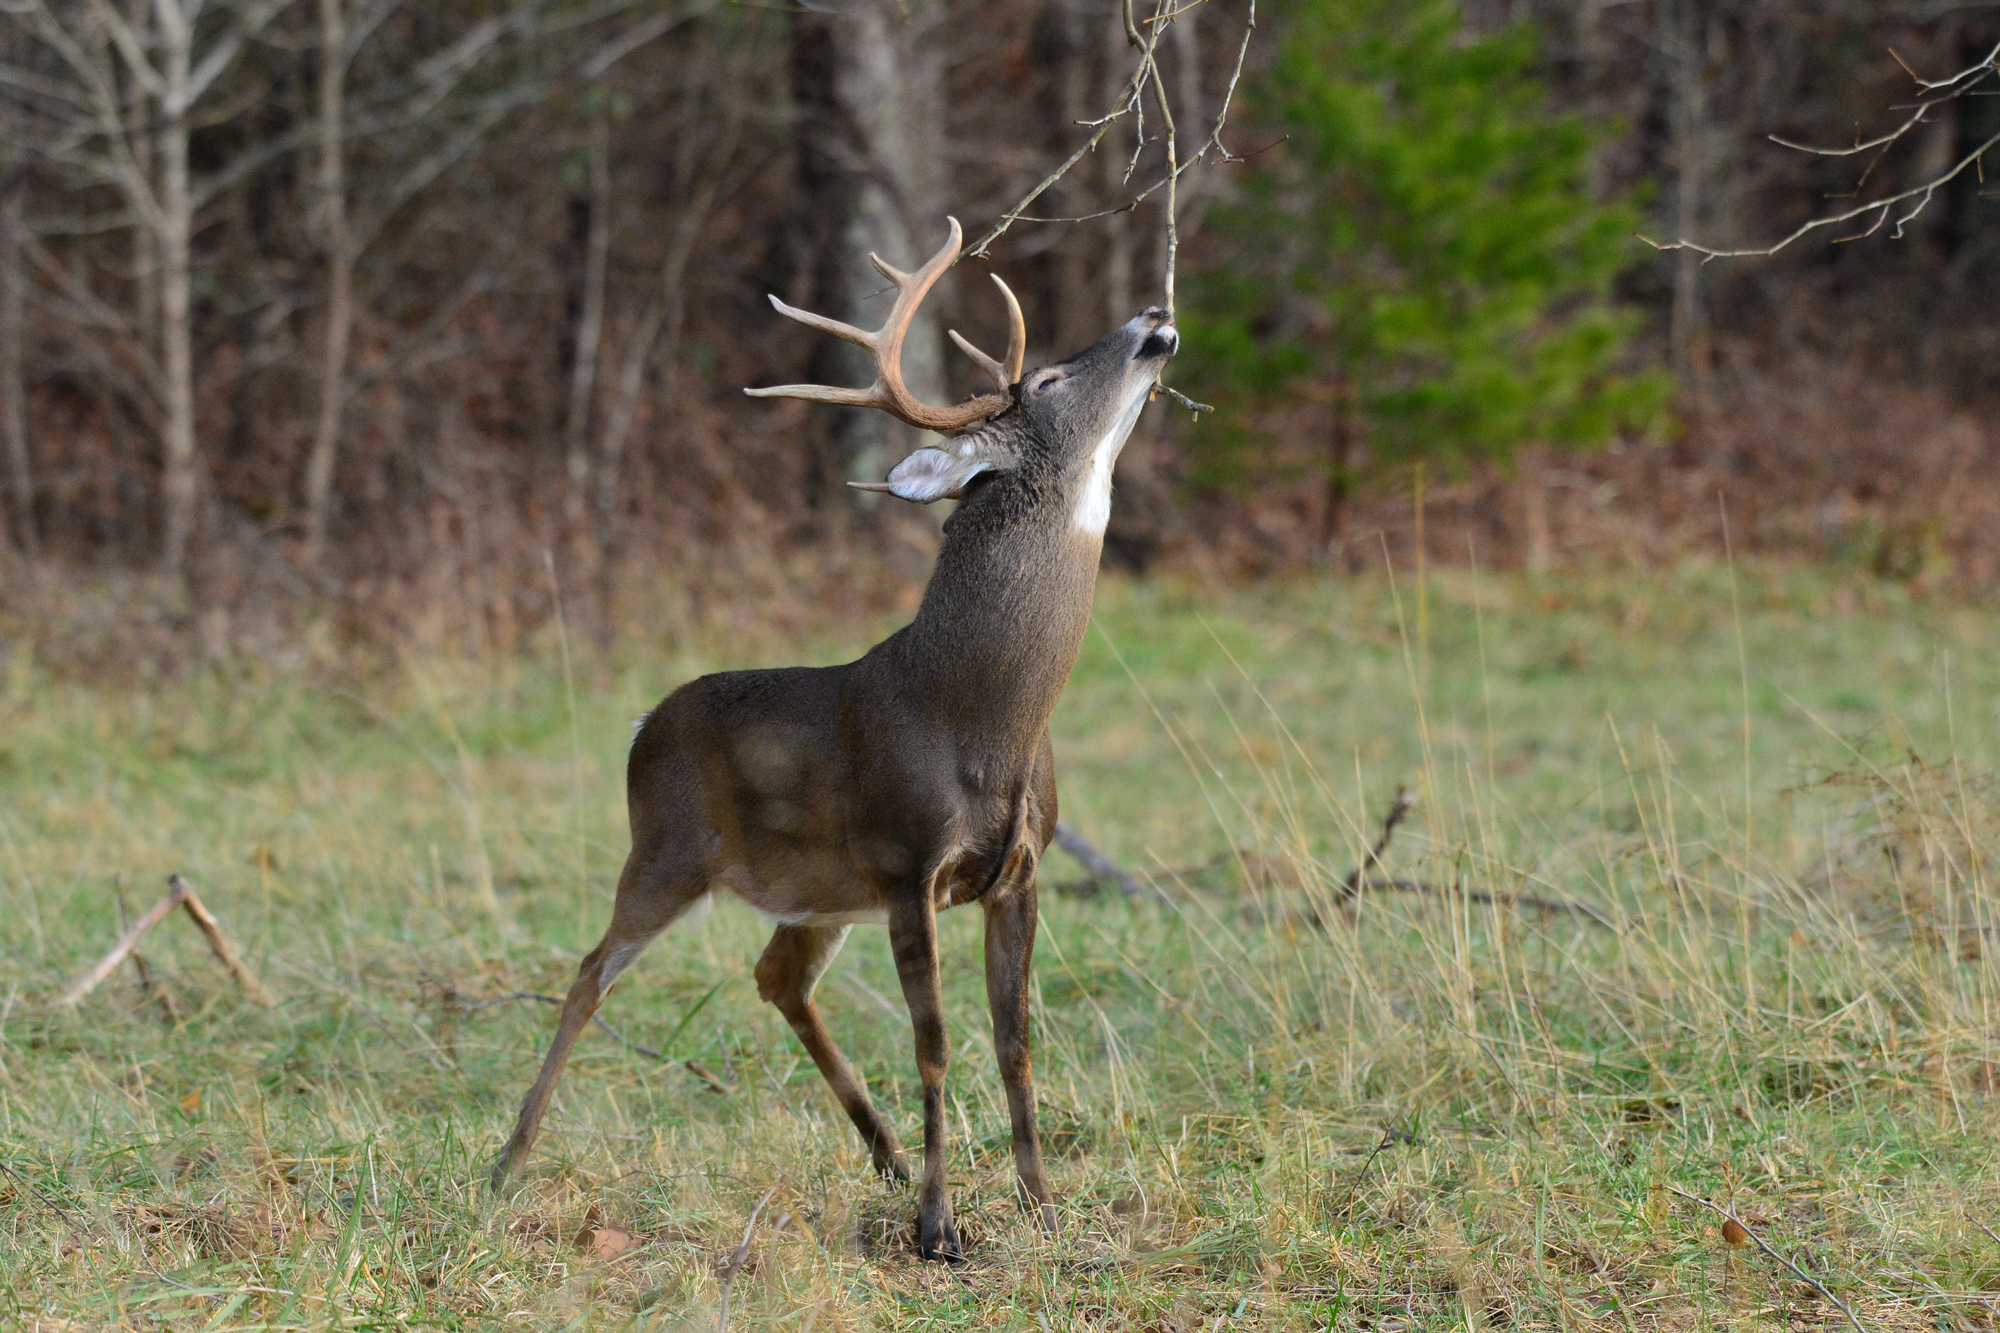 Bucks lick tree branches, which is one way deer become infected with CWD.